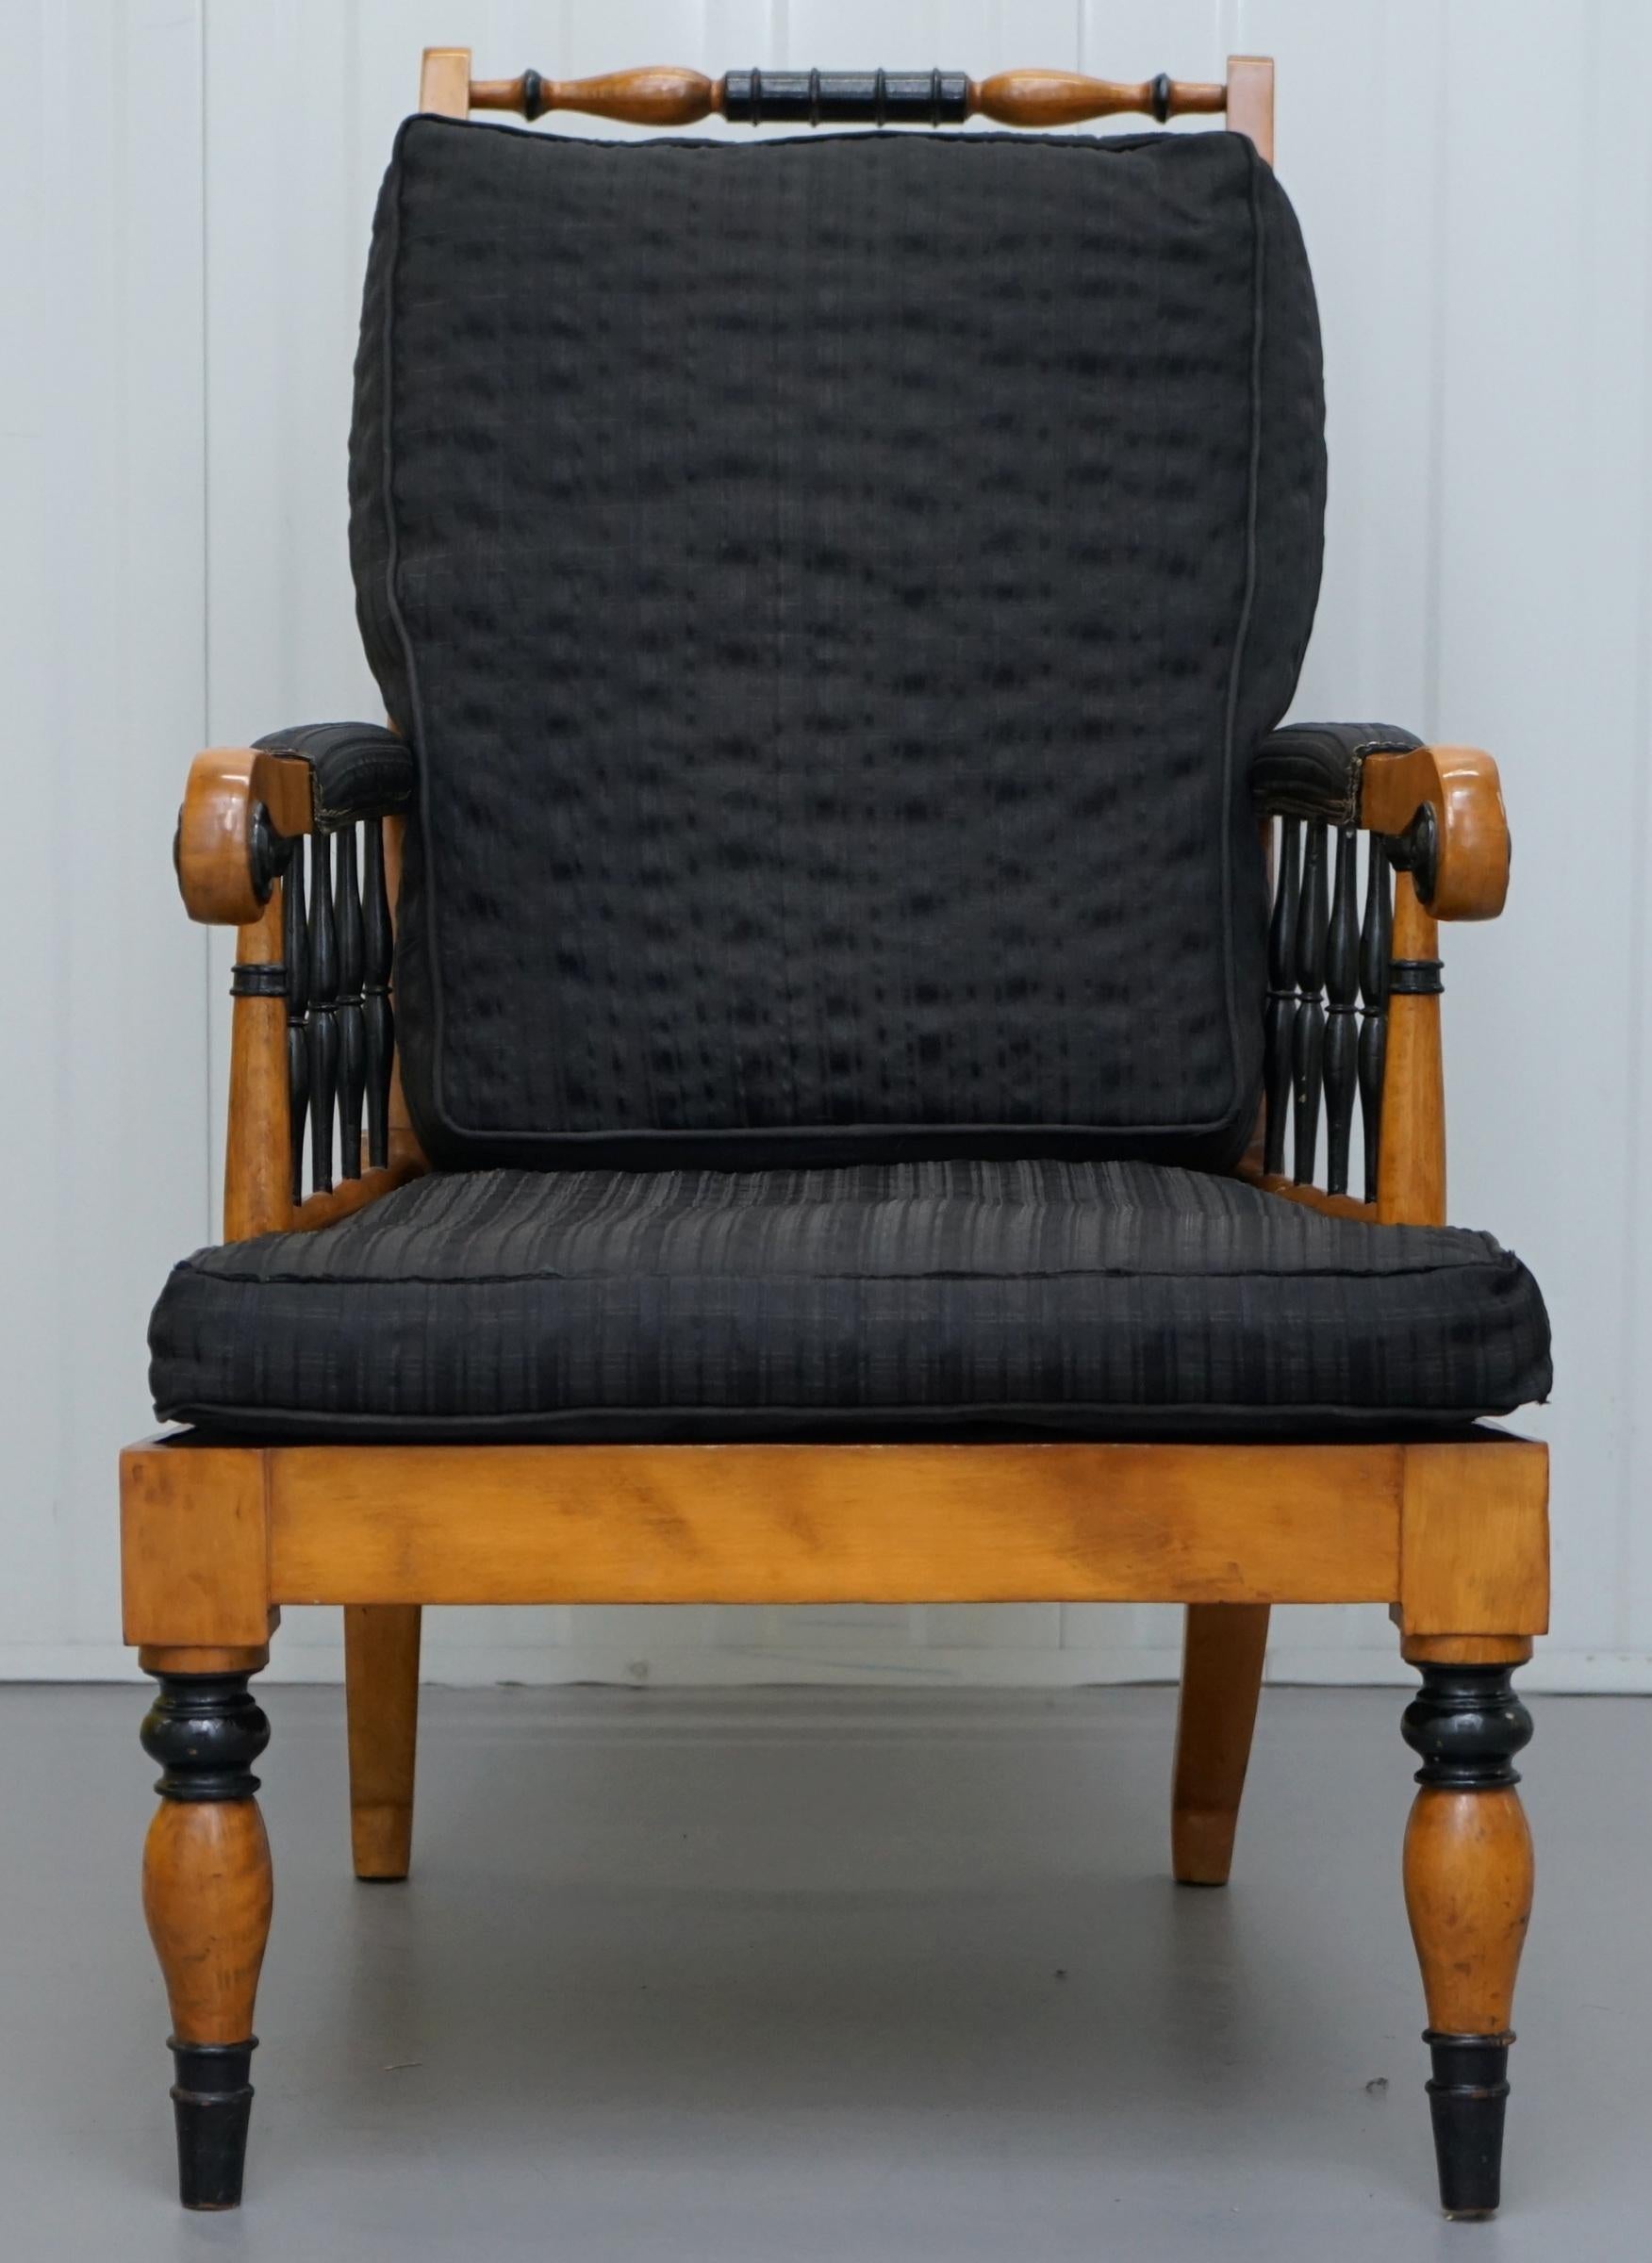 We are delighted to this lovely hand made Swedish Biedermeier library reading armchair

A very good looking and decorative armchair, designed as a library ready chair, it's very comfortable and looks great

We have cleaned waxed and polished it,